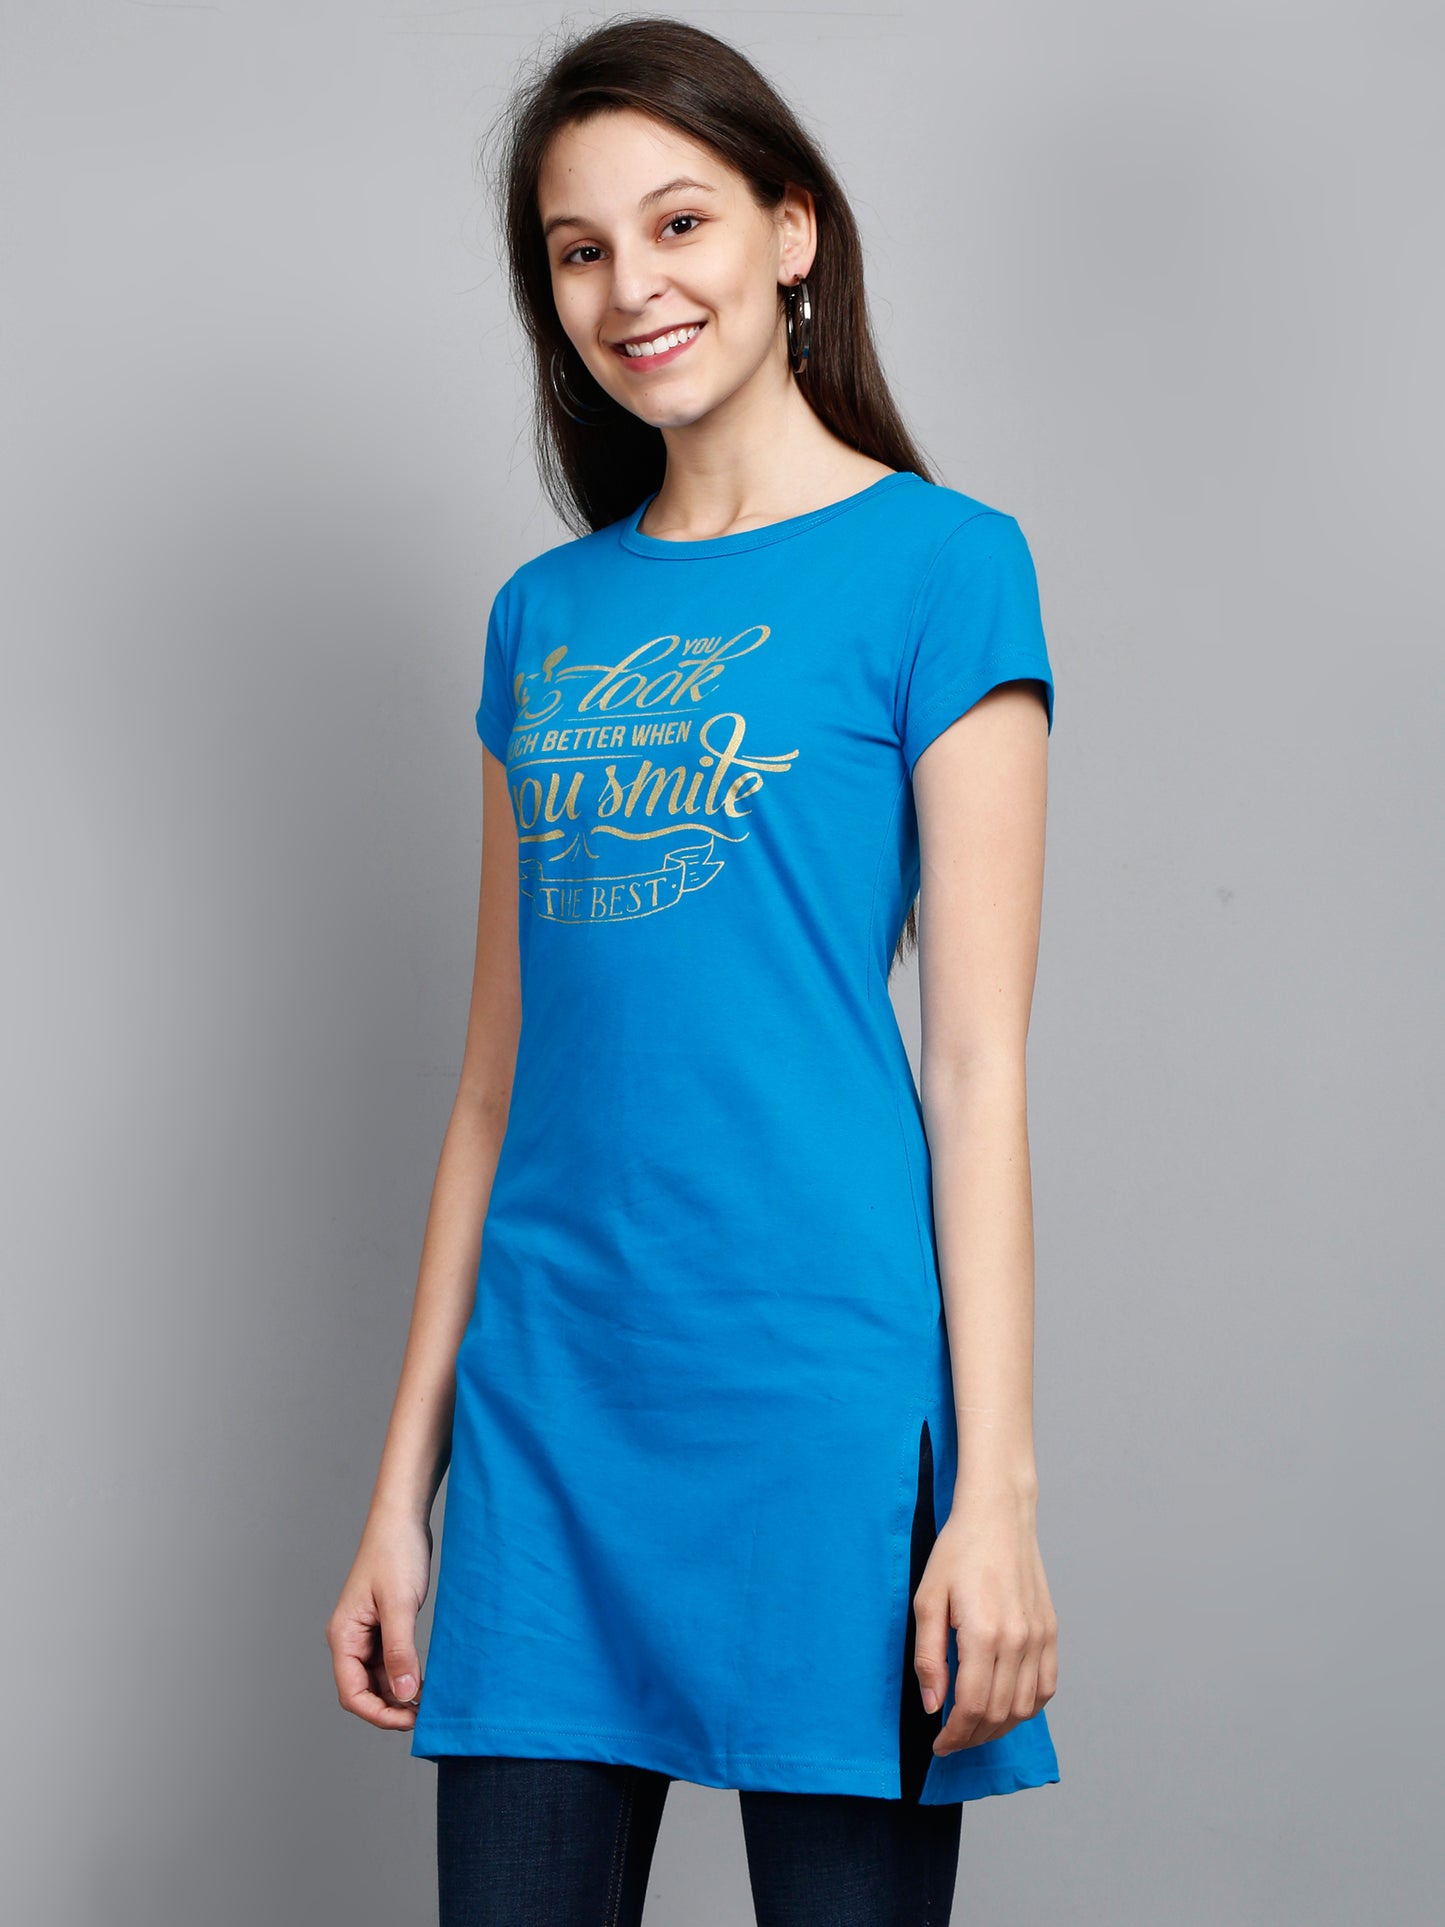 Women's Cotton Round Neck Blue Color Long Top Chest Printed with Side Cut